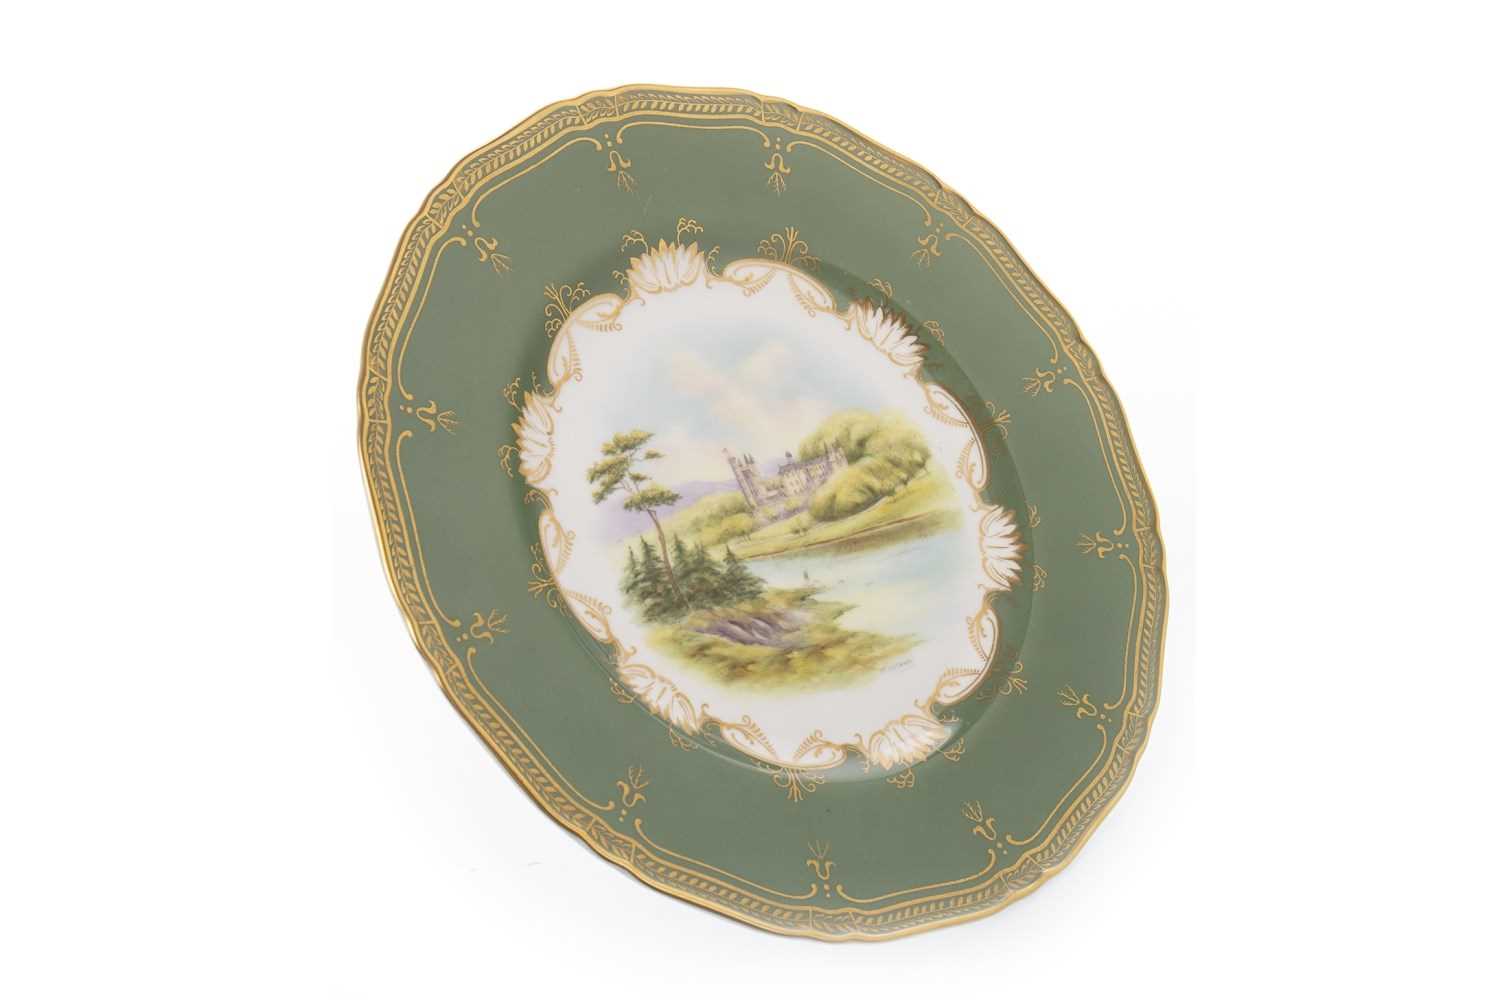 Lot 1287 - A ROYAL WORCESTER PLATE BY MILWYN HOLLOWAY